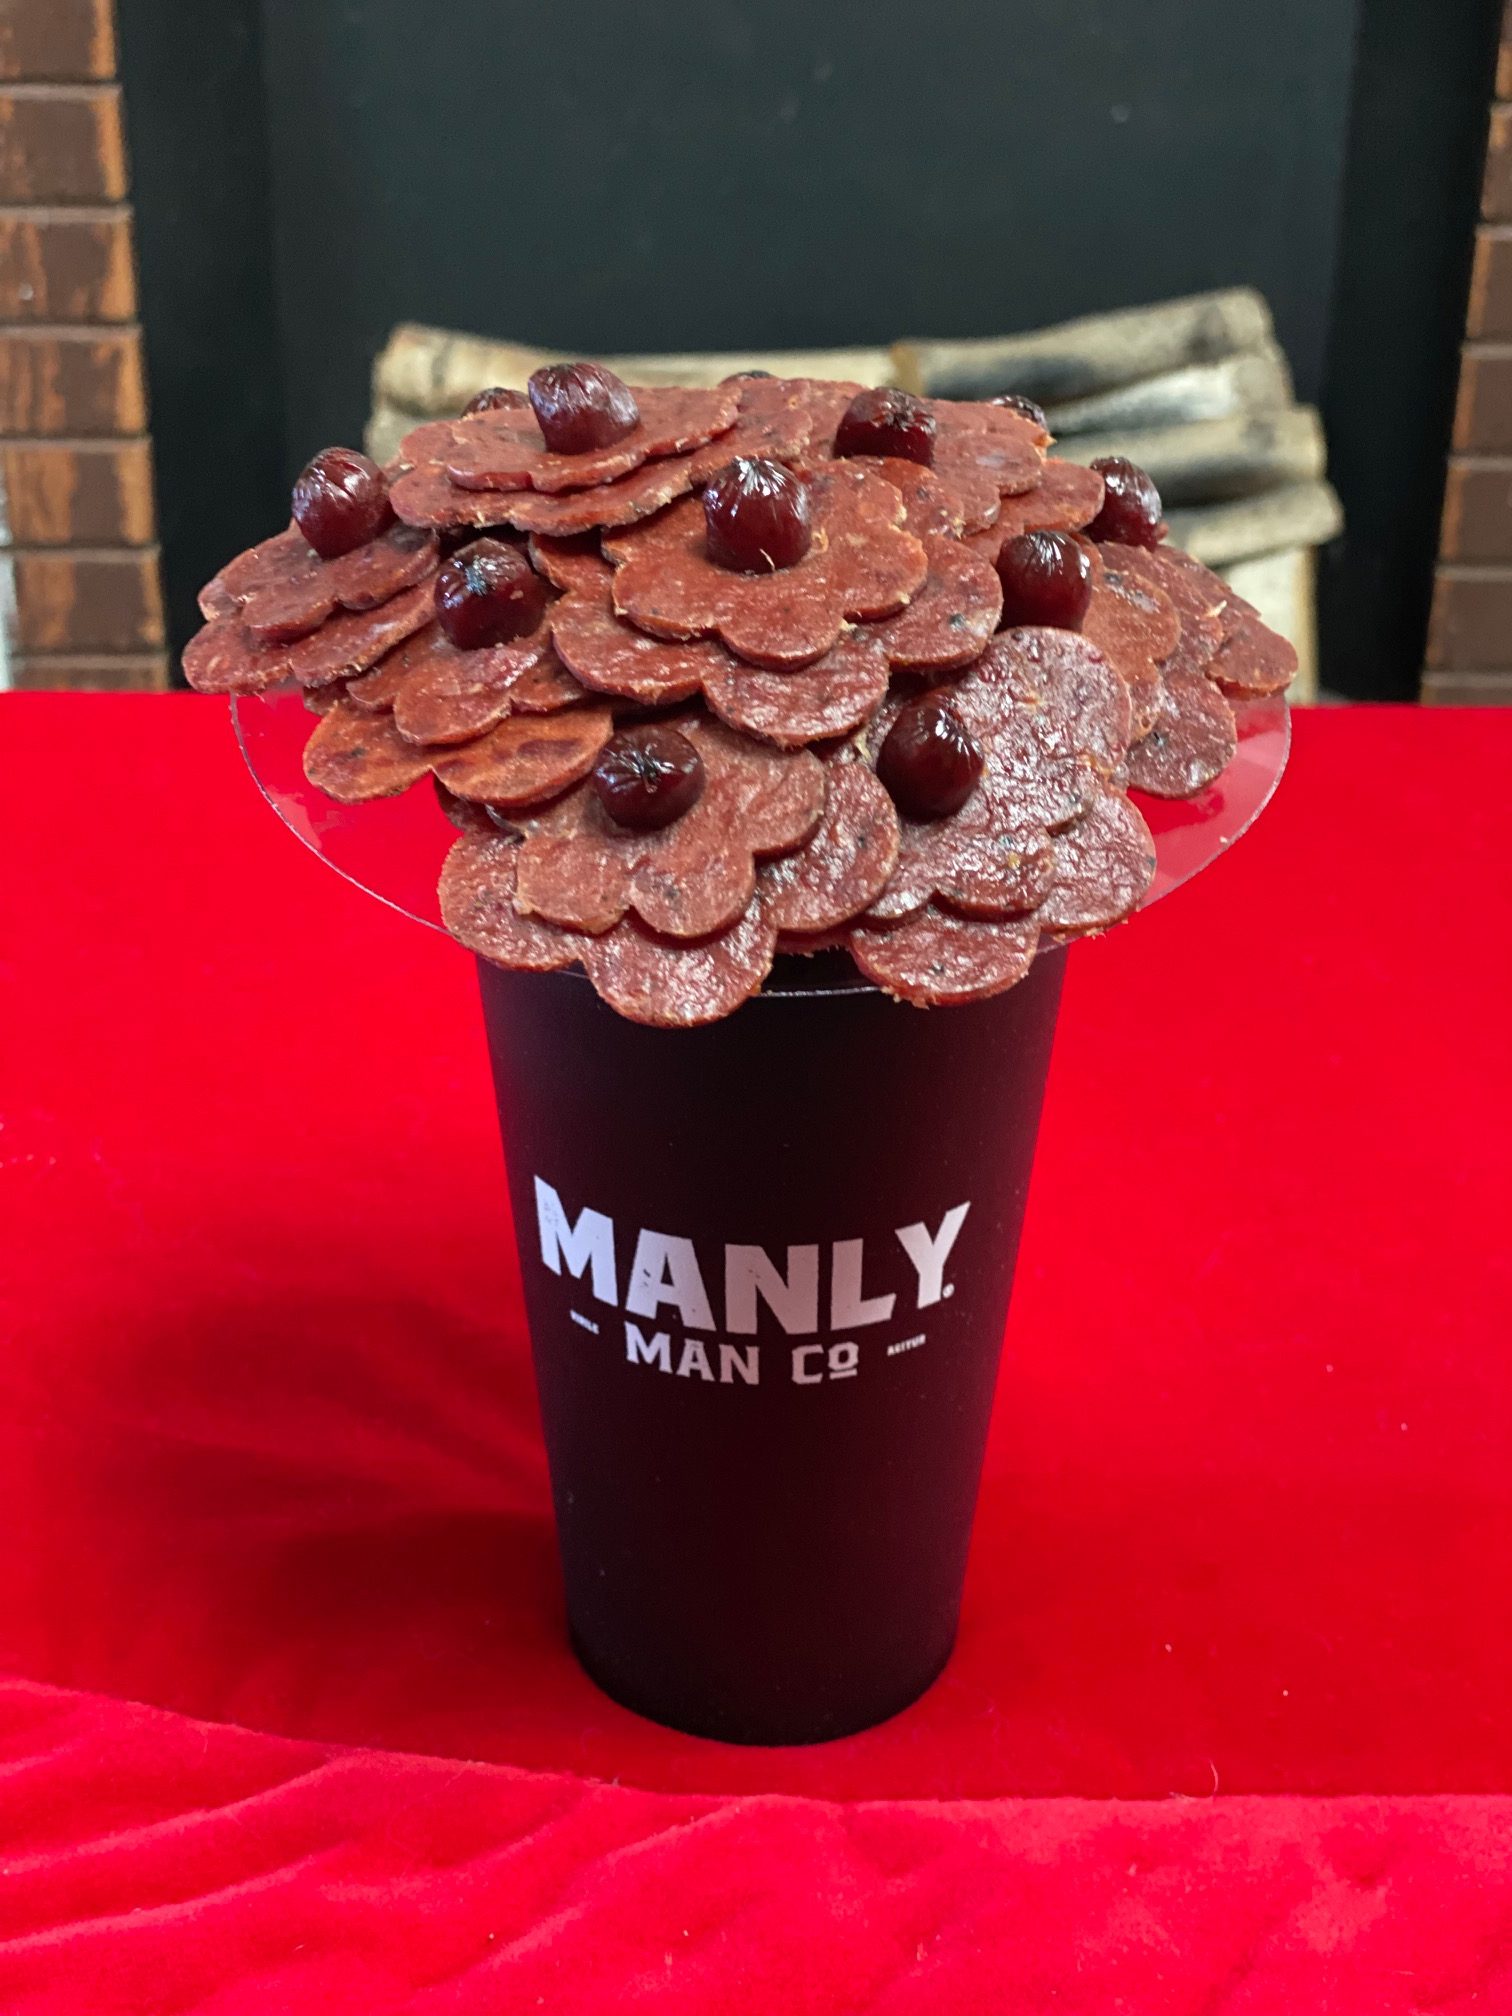 The Manly Man Beef Jerky Bouquet